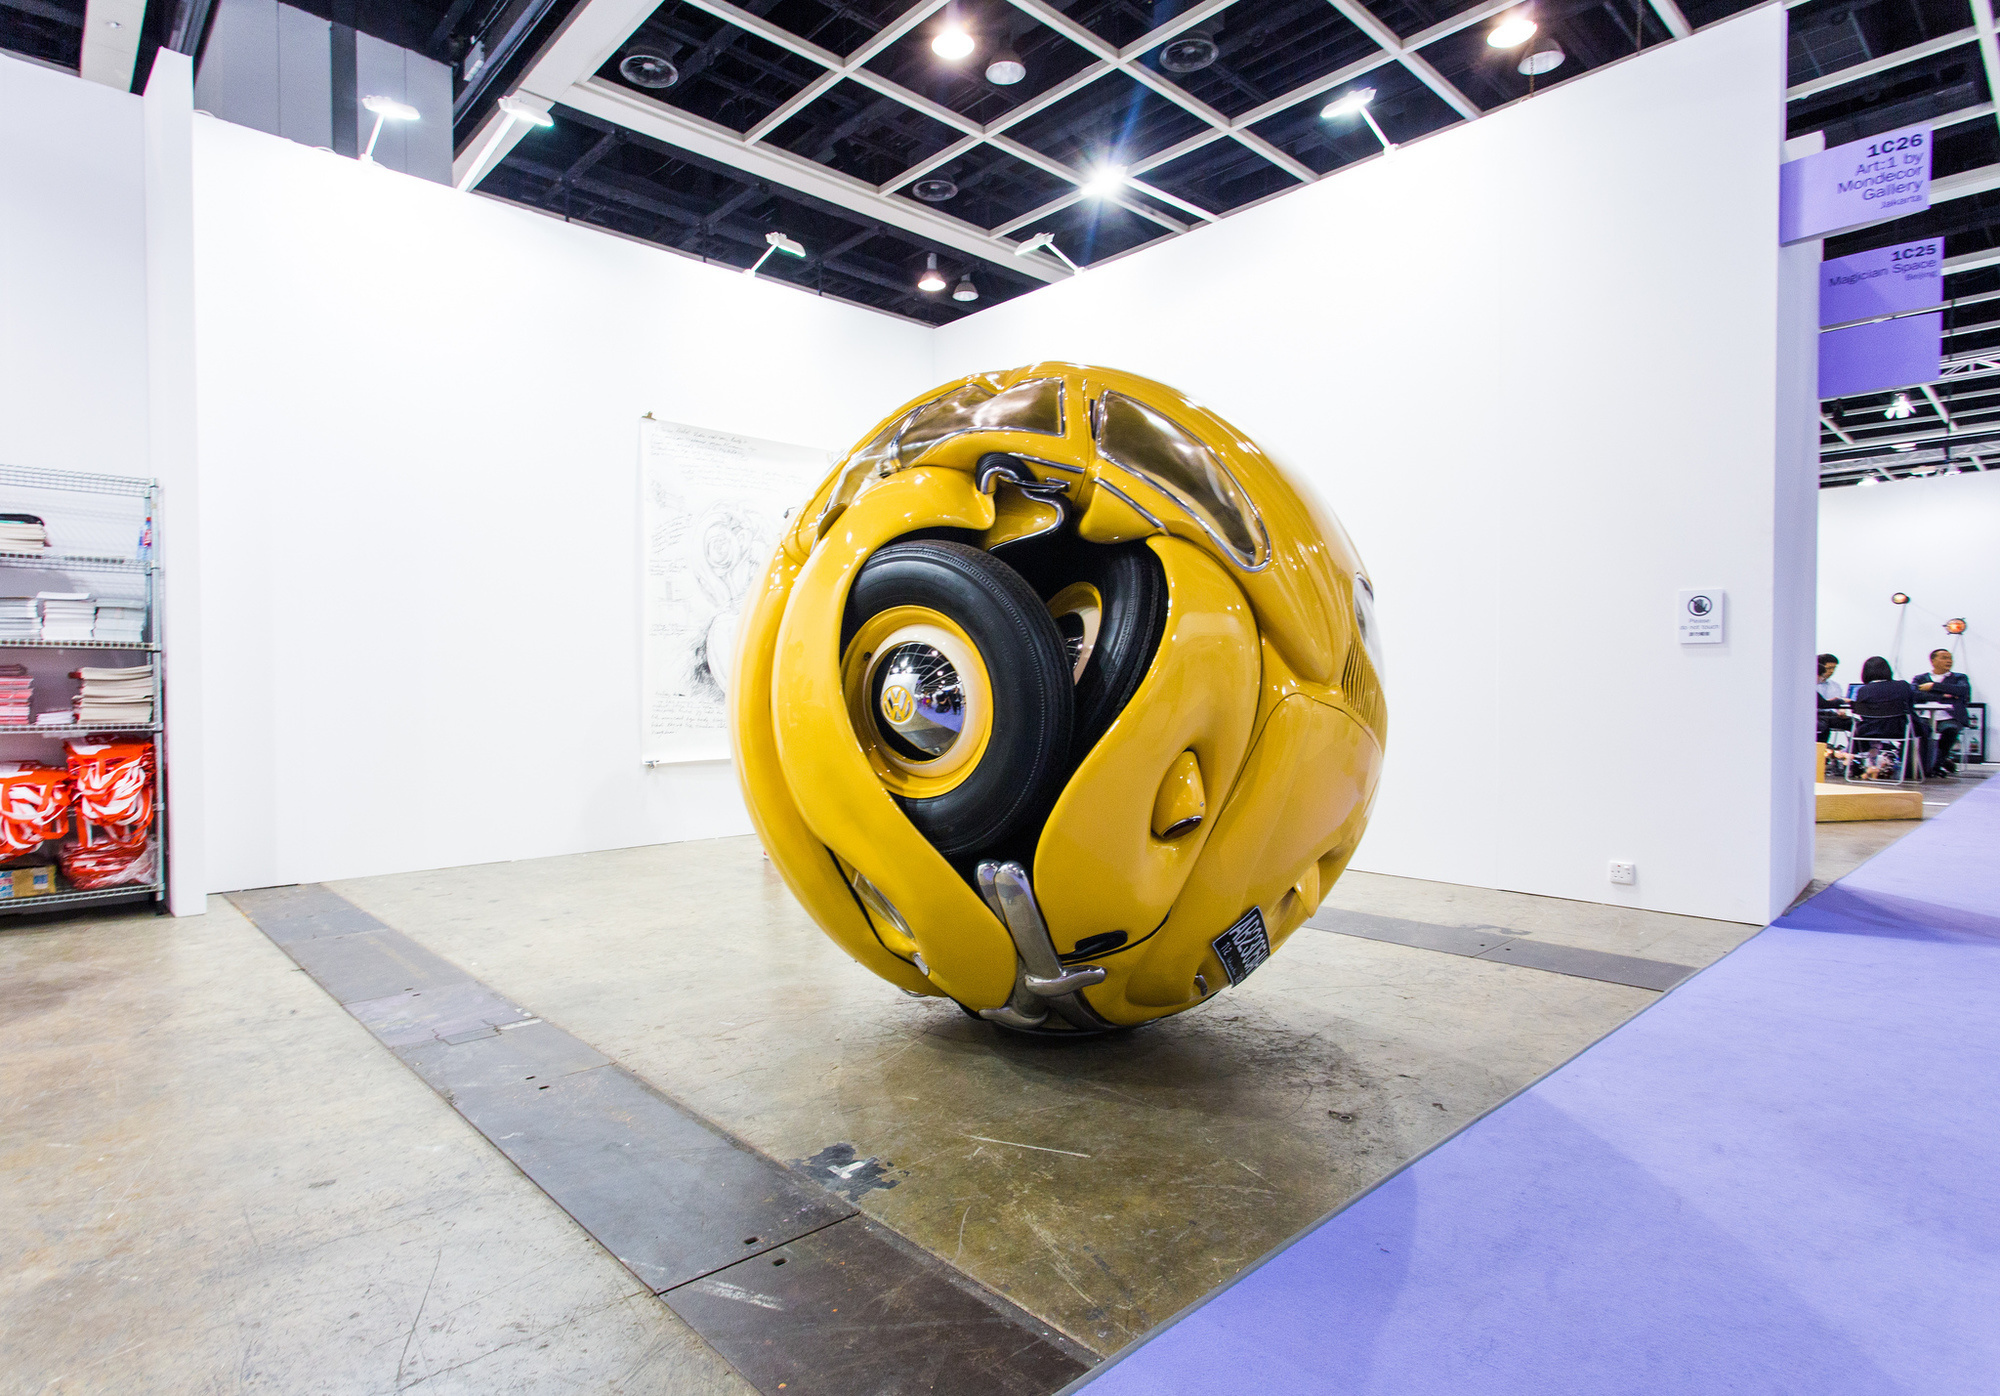 Inspired by his belief that objects are products of a "transportation culture," Indonesian artist Ichwan Noor created this Beetle Sphere in 2013.